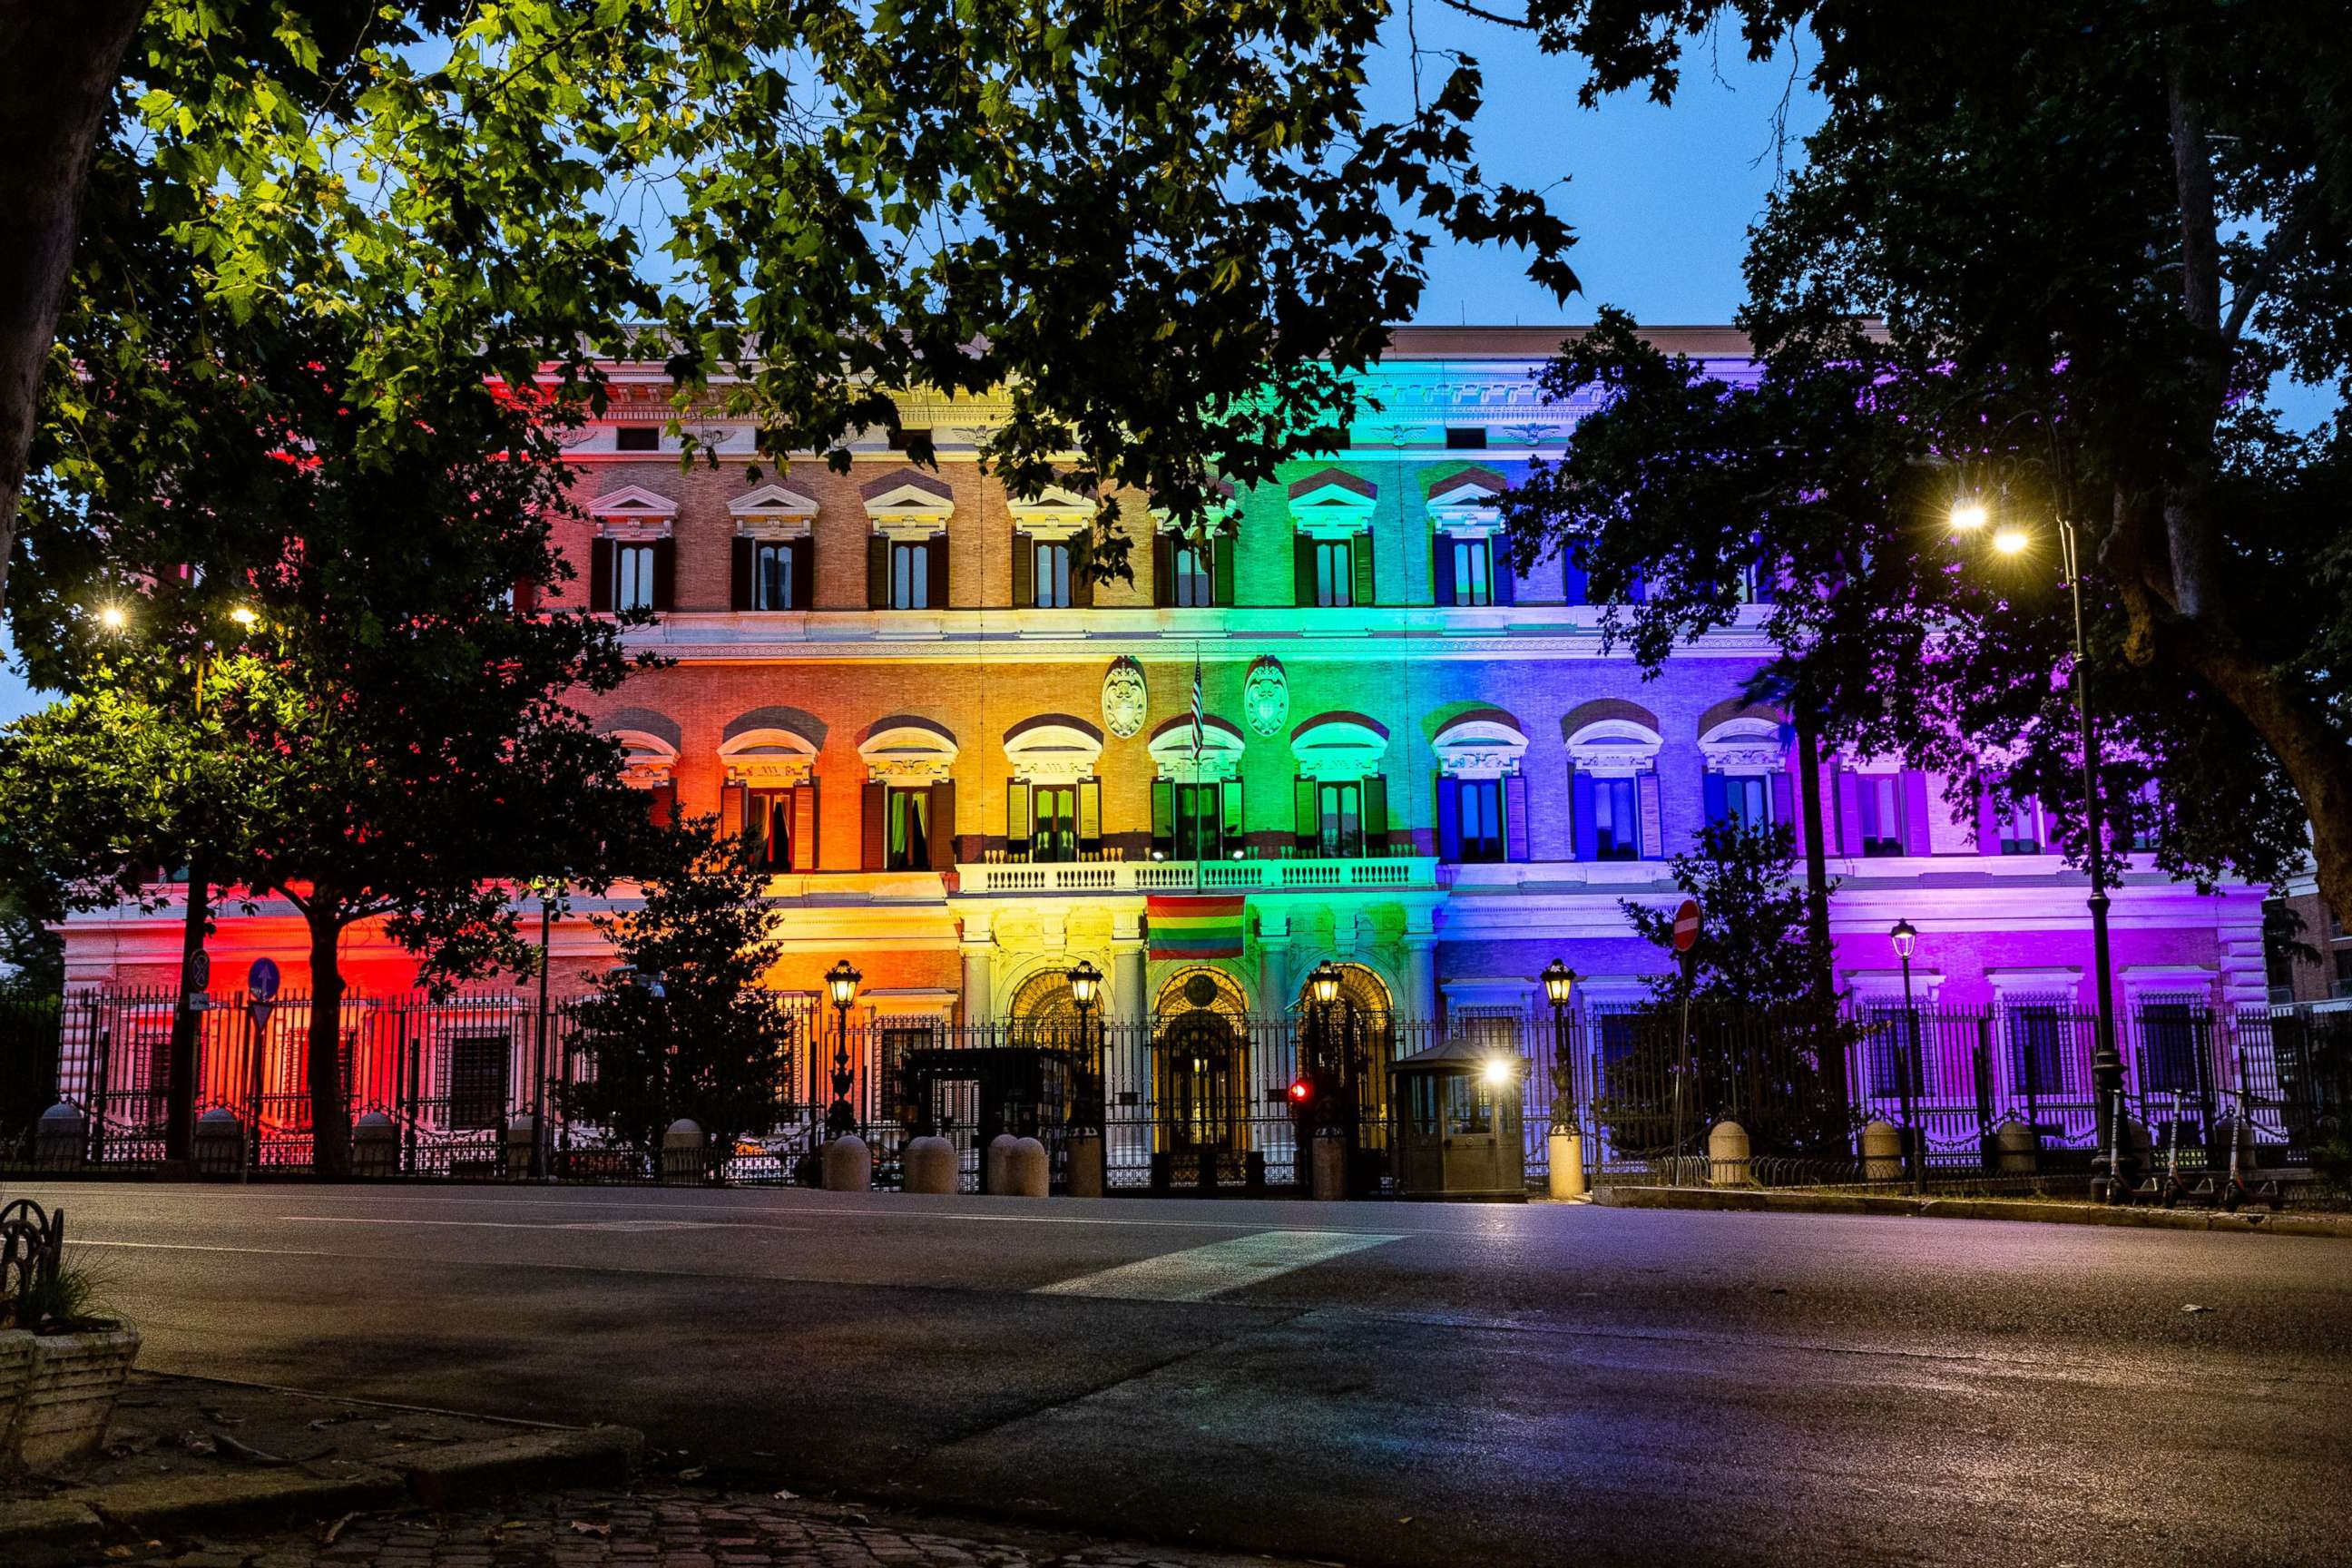 PHOTO: The U.S. Embassy in Rome lights up in rainbow colors for Pride month, June 21 2021.